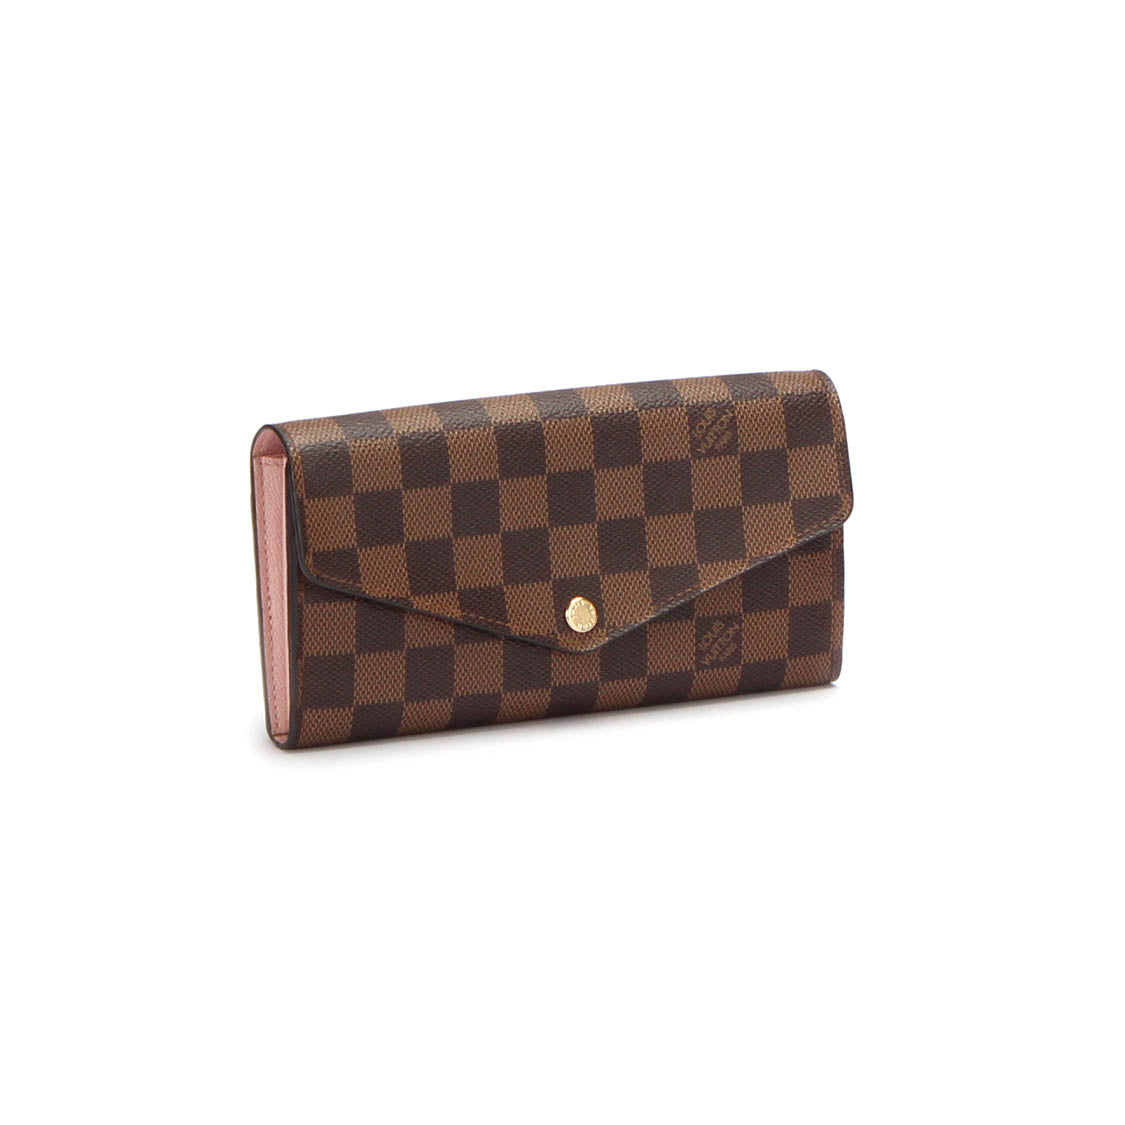 Sarah Wallet Damier Ebene Canvas - Wallets and Small Leather Goods N60114